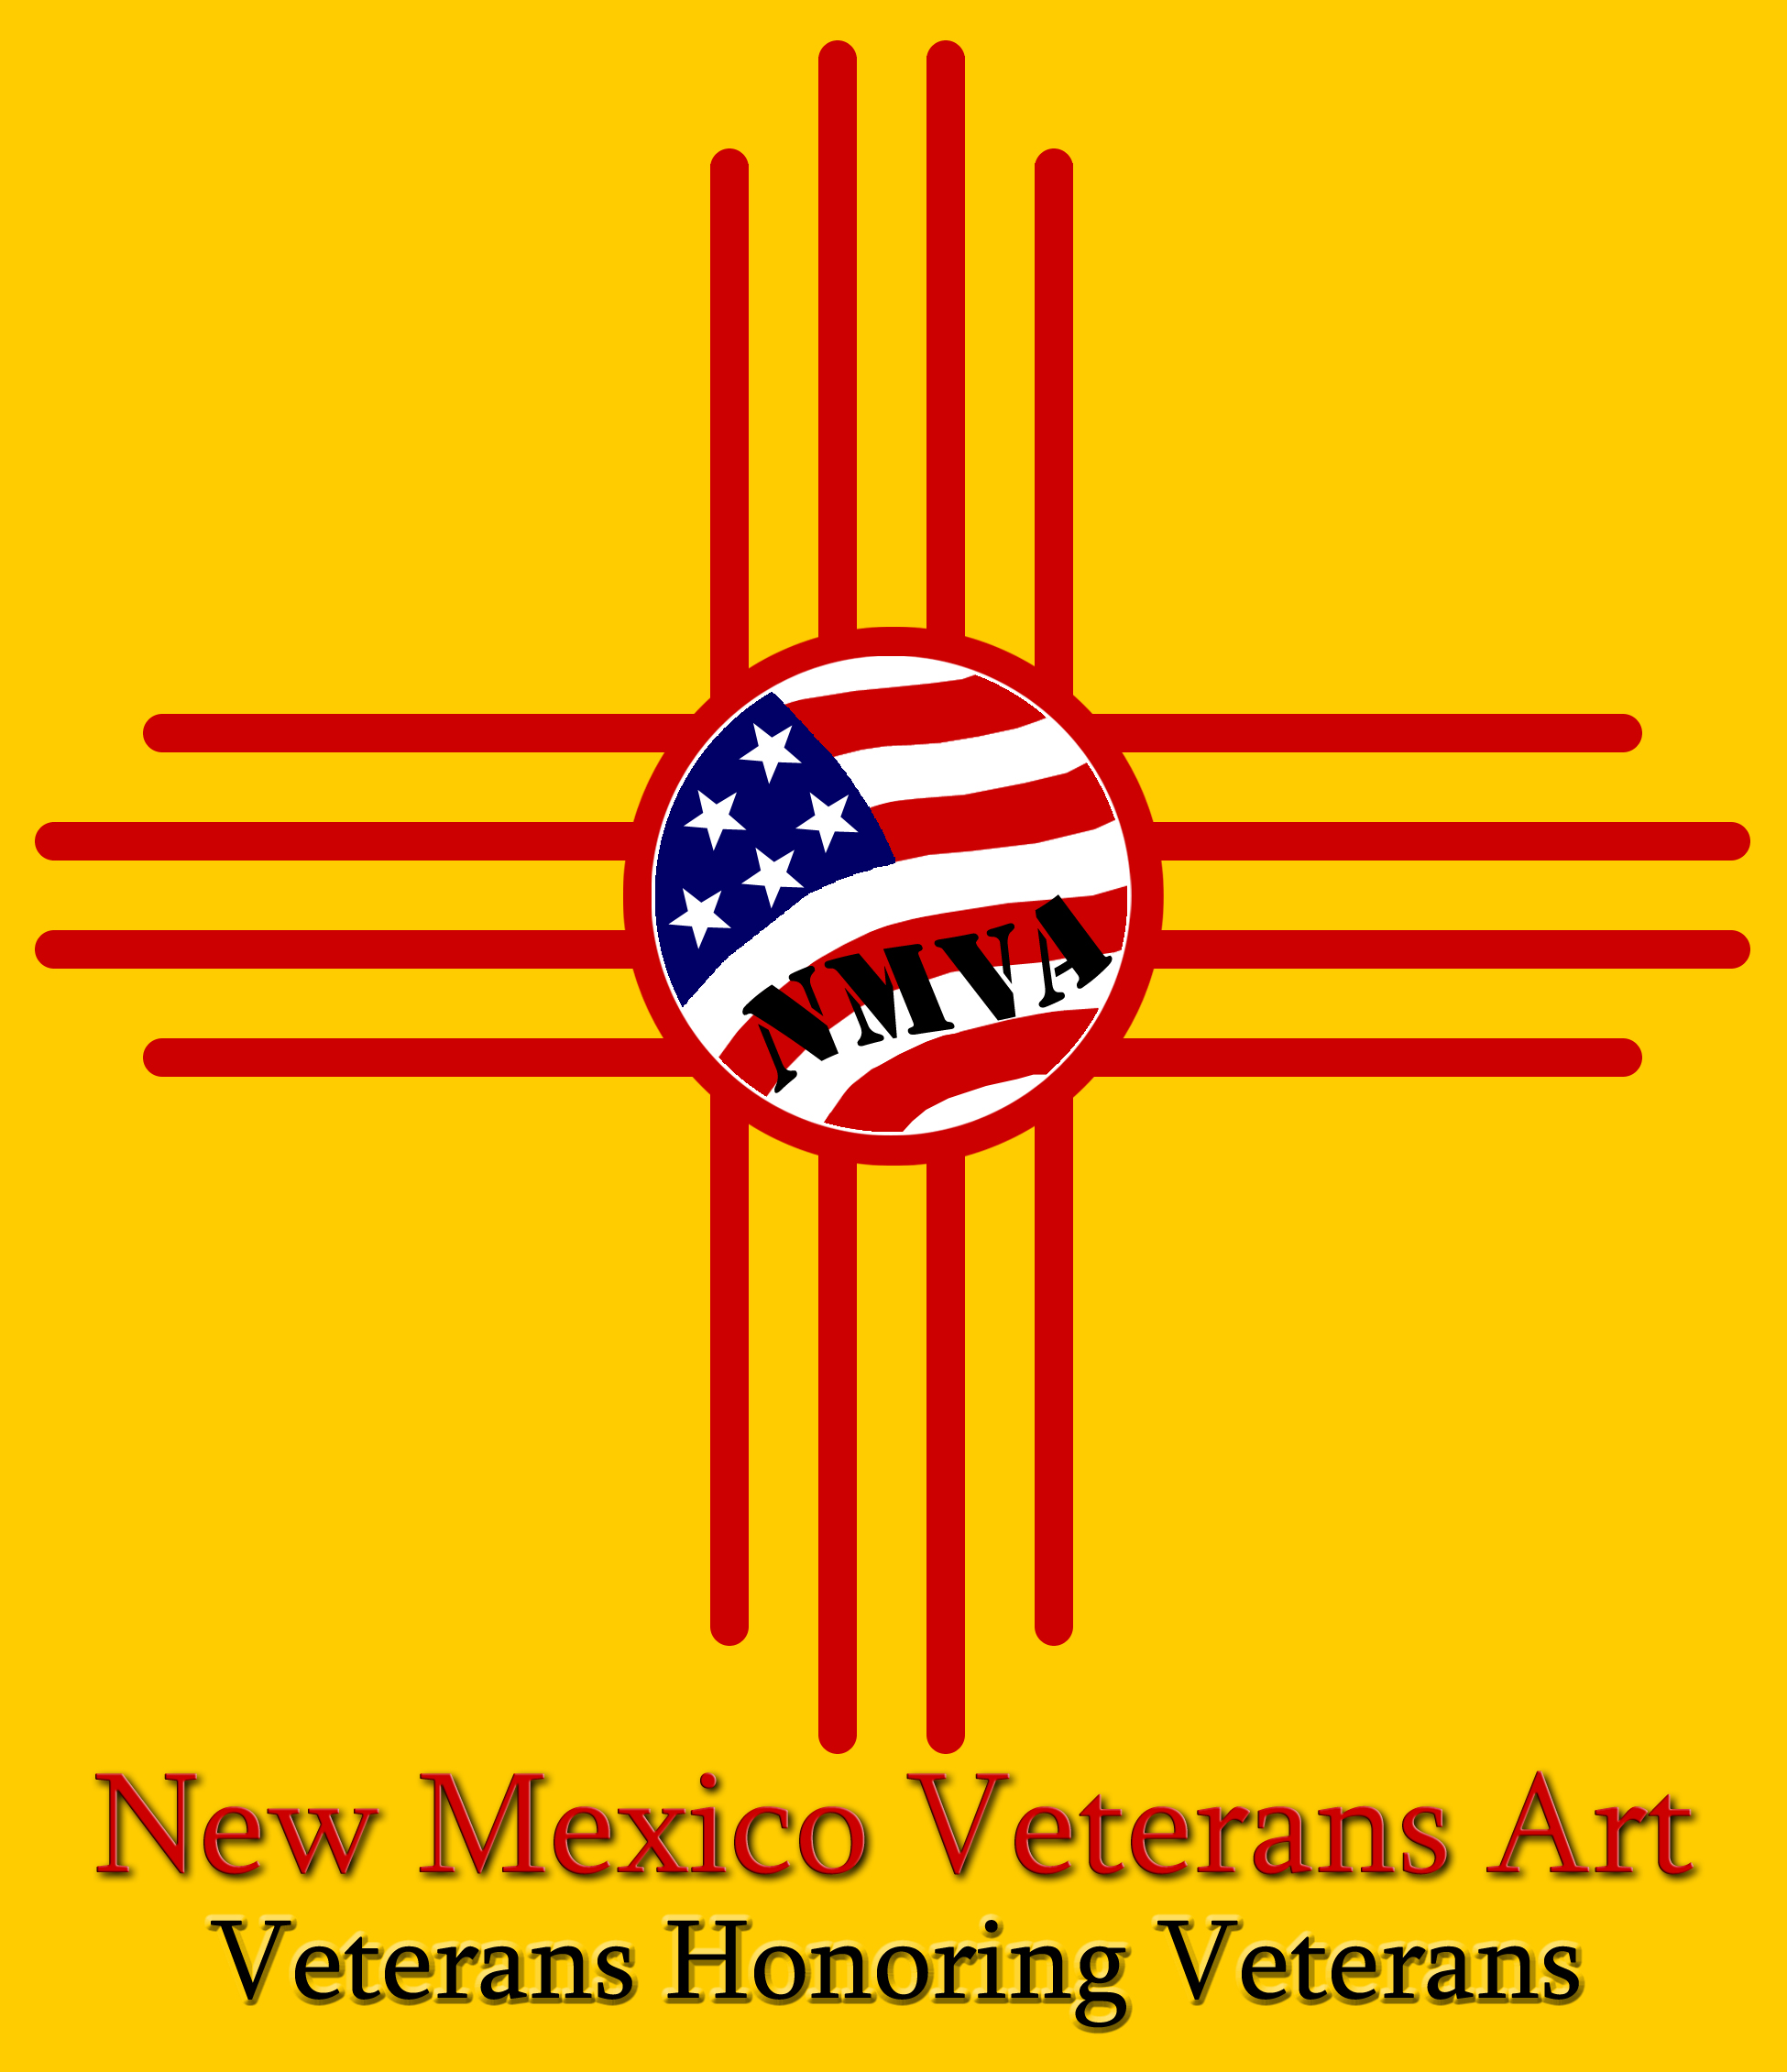 New Mexico Veteran’s Art is the local Albuquerque group I’ve joined as an Artists.